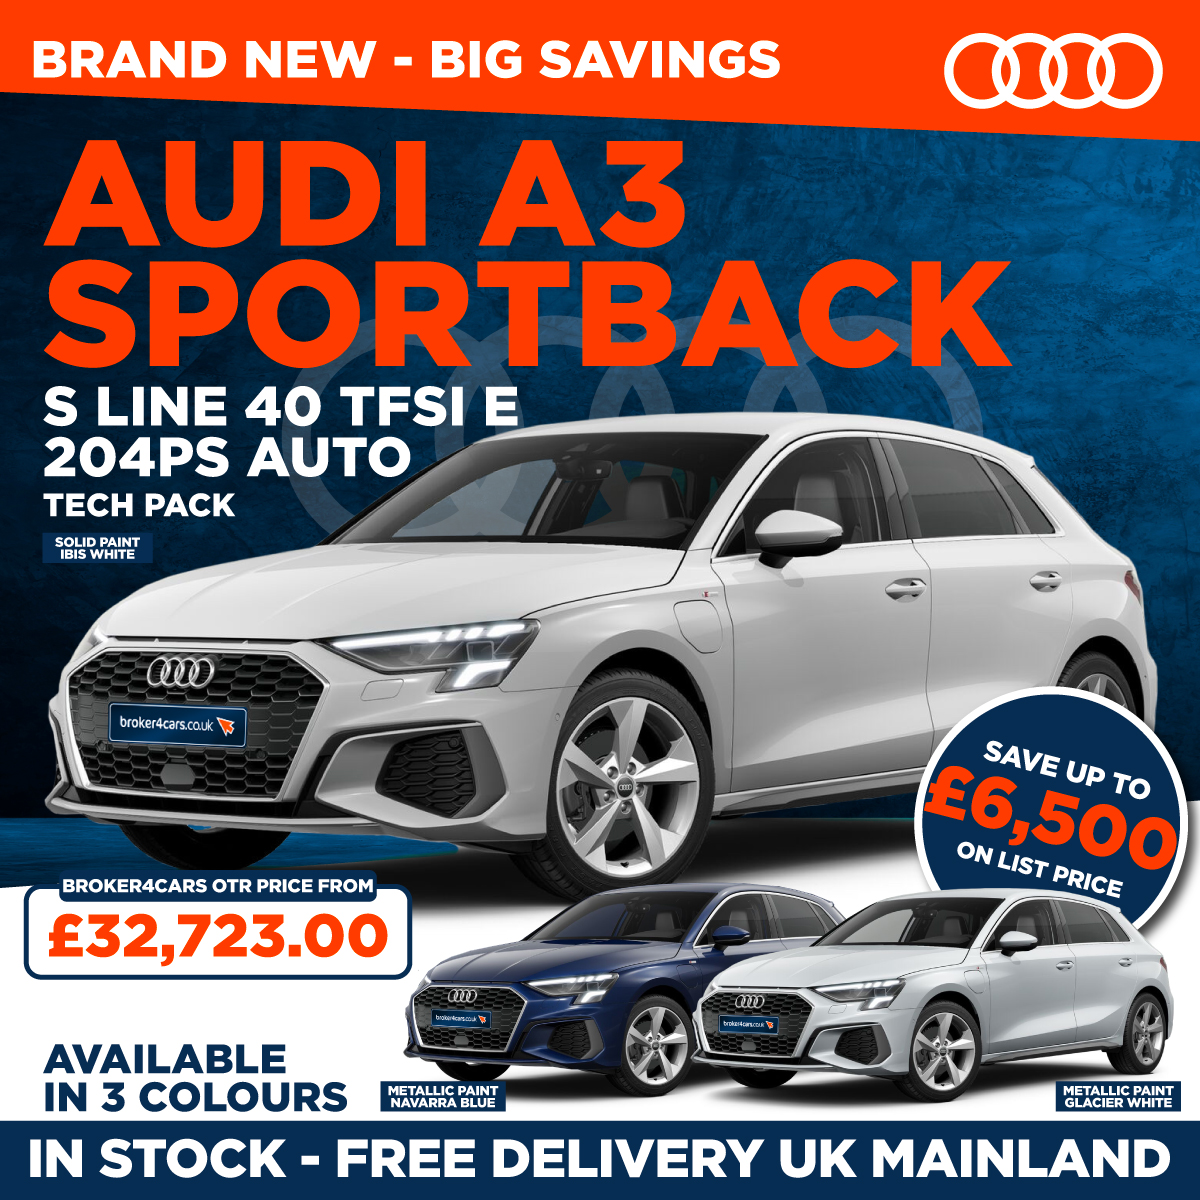 A3 Sportback S-LINE 40 TFSIe 204ps Auto. Available in Navarra Blue, Glacier White & Ibis White. Tech Pack. Save up to £6,500 on list price. Broker4Cars Price £32,723 OTR